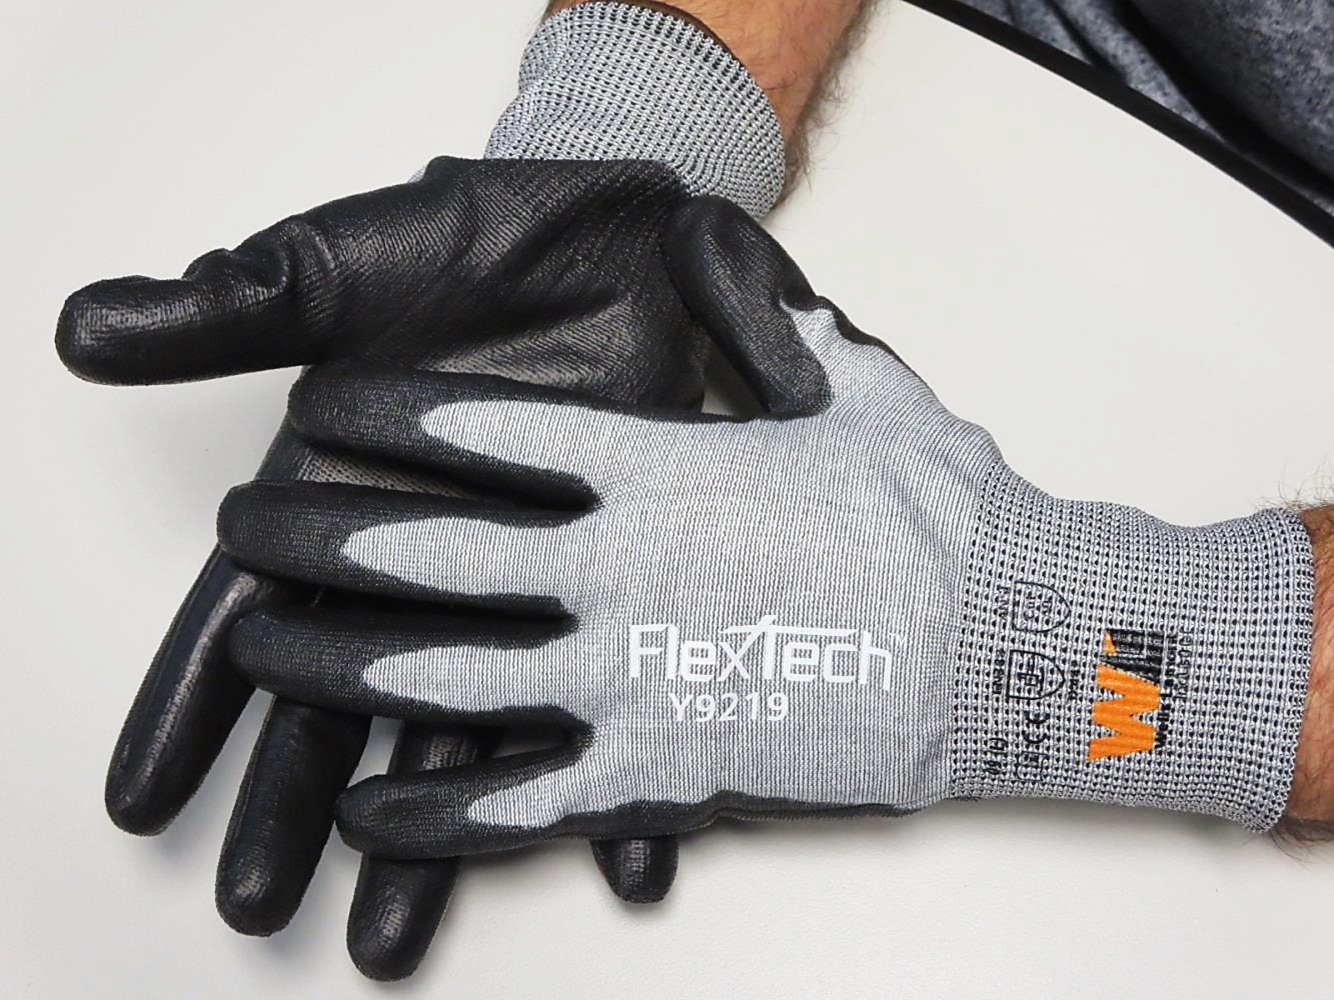 Y9219 Wells Lamont FlexTech™ PU Coated Extreme Cut Level A9 18-Gauge Seamless Knit Work Gloves